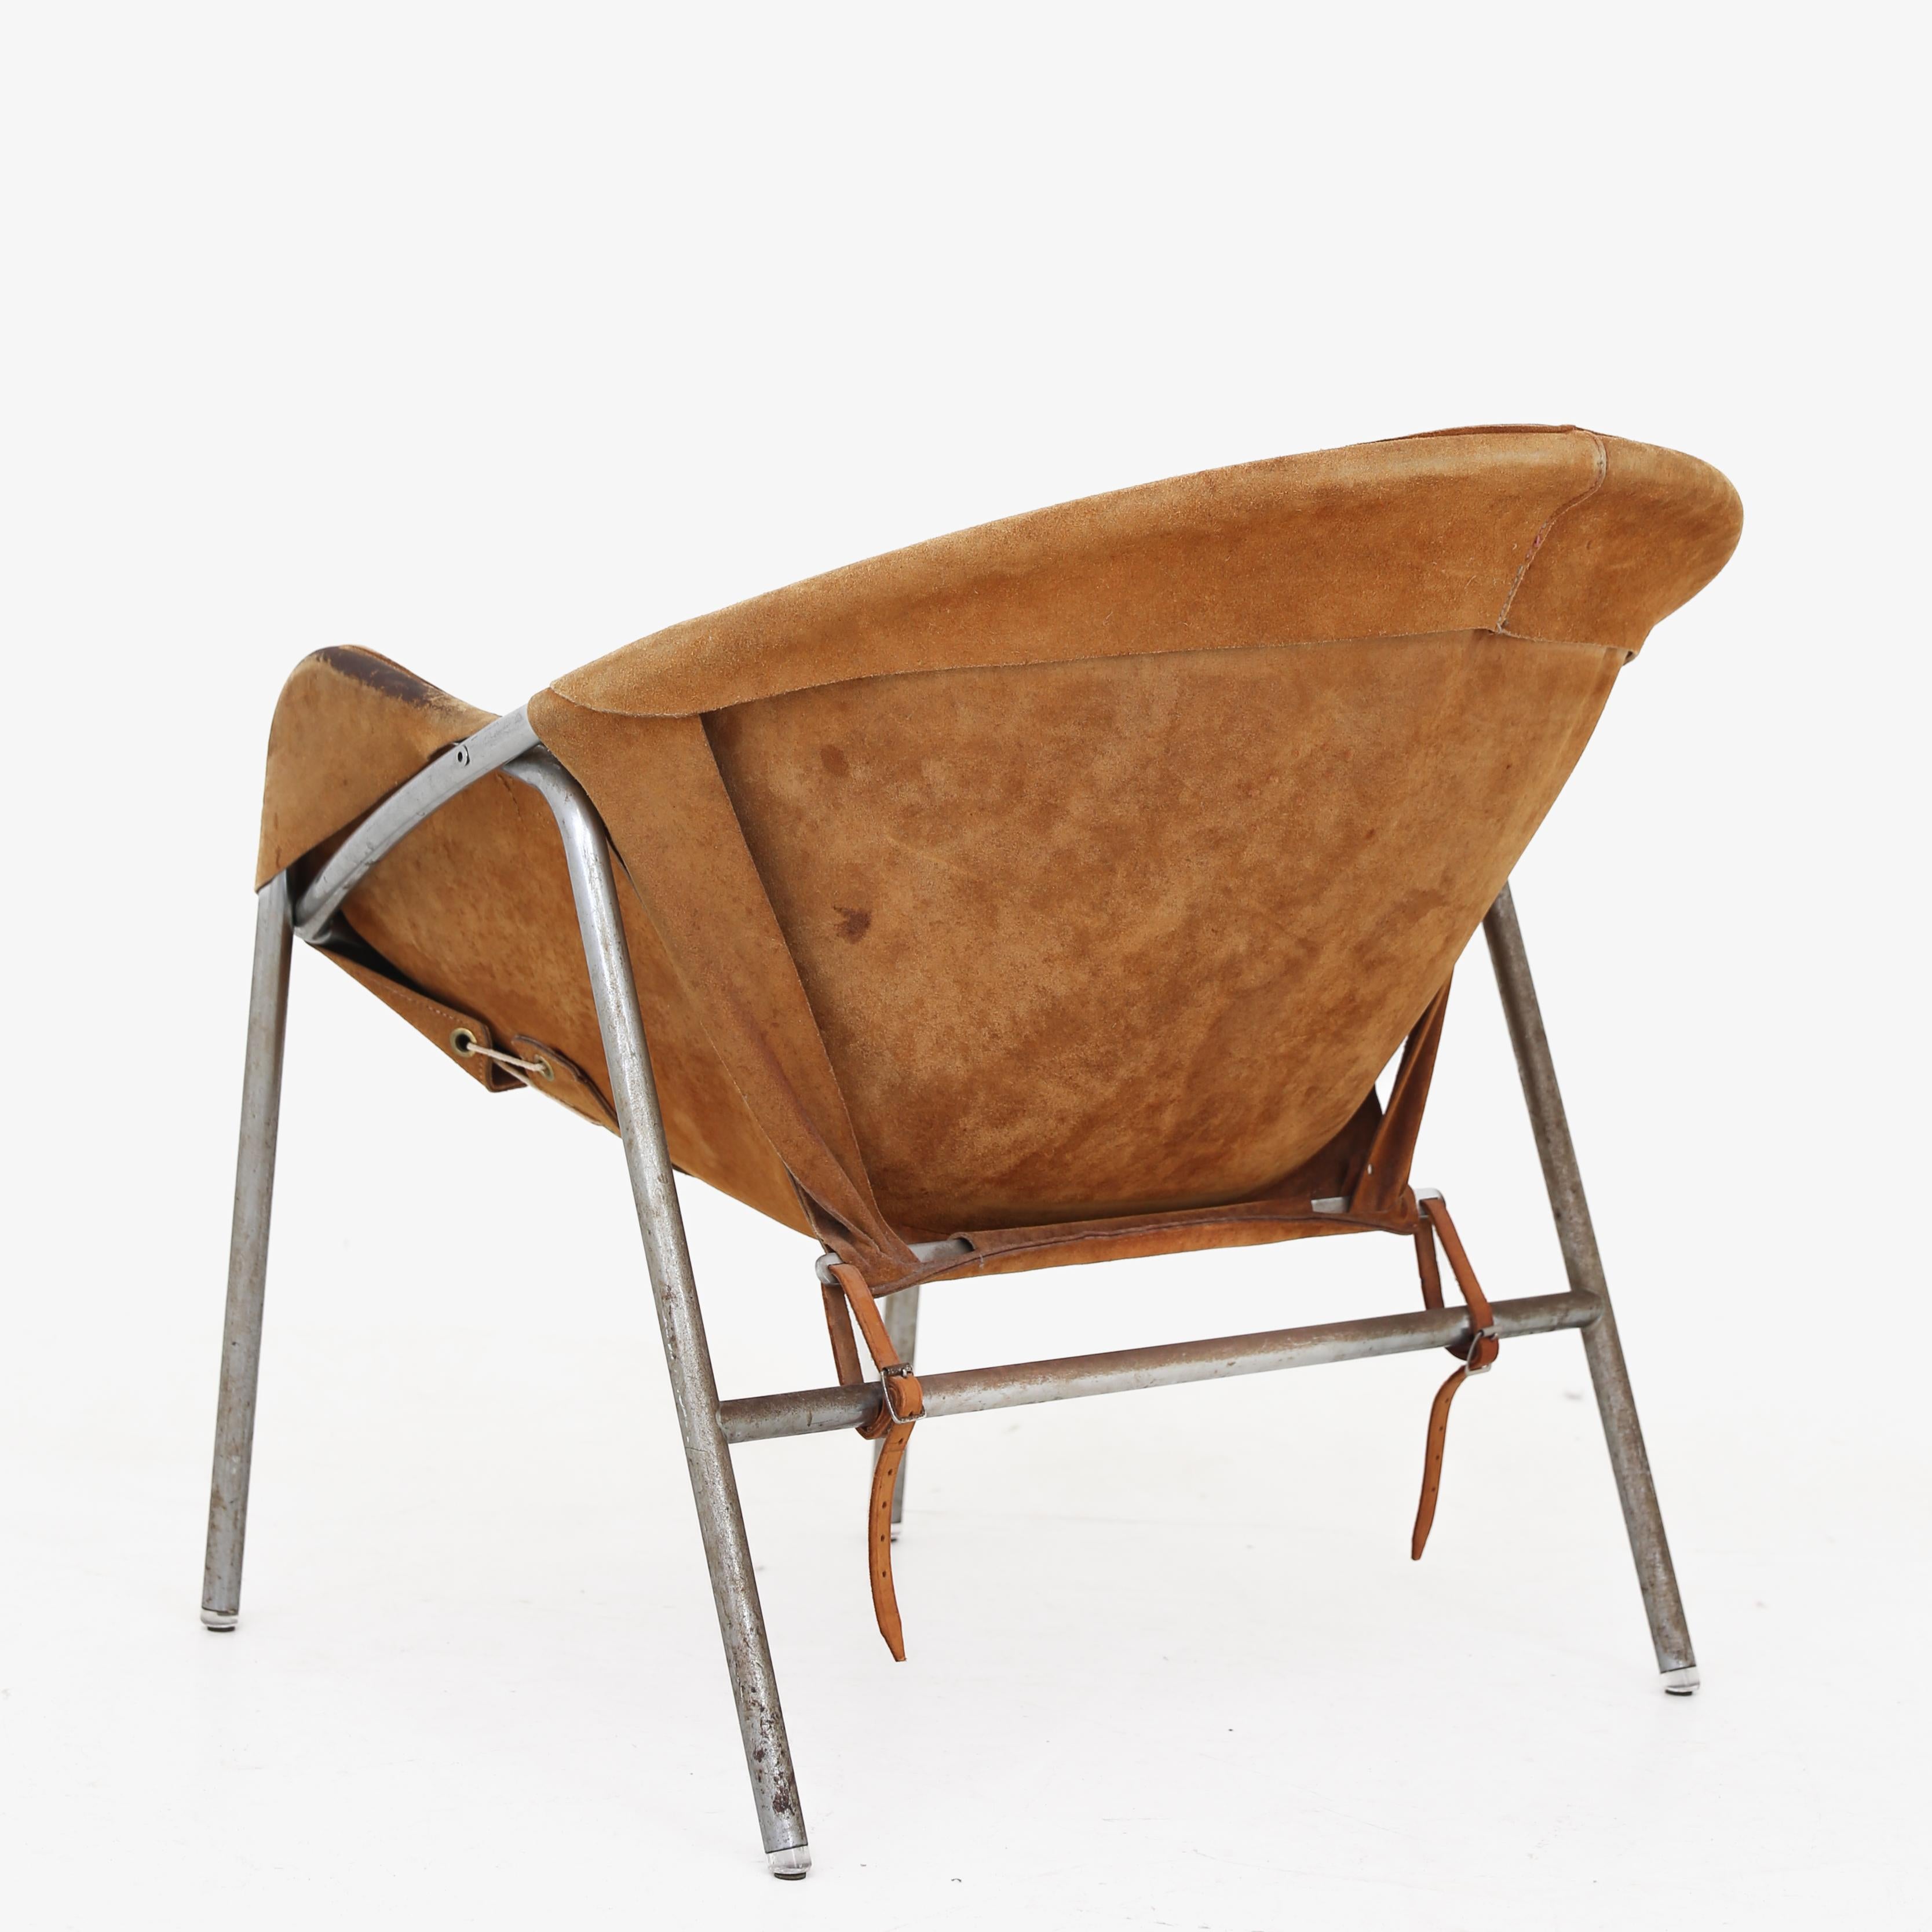 BO 361 - Low back easy chair with patinated suede. Erik Ole Jørgensen / Bovirke. 